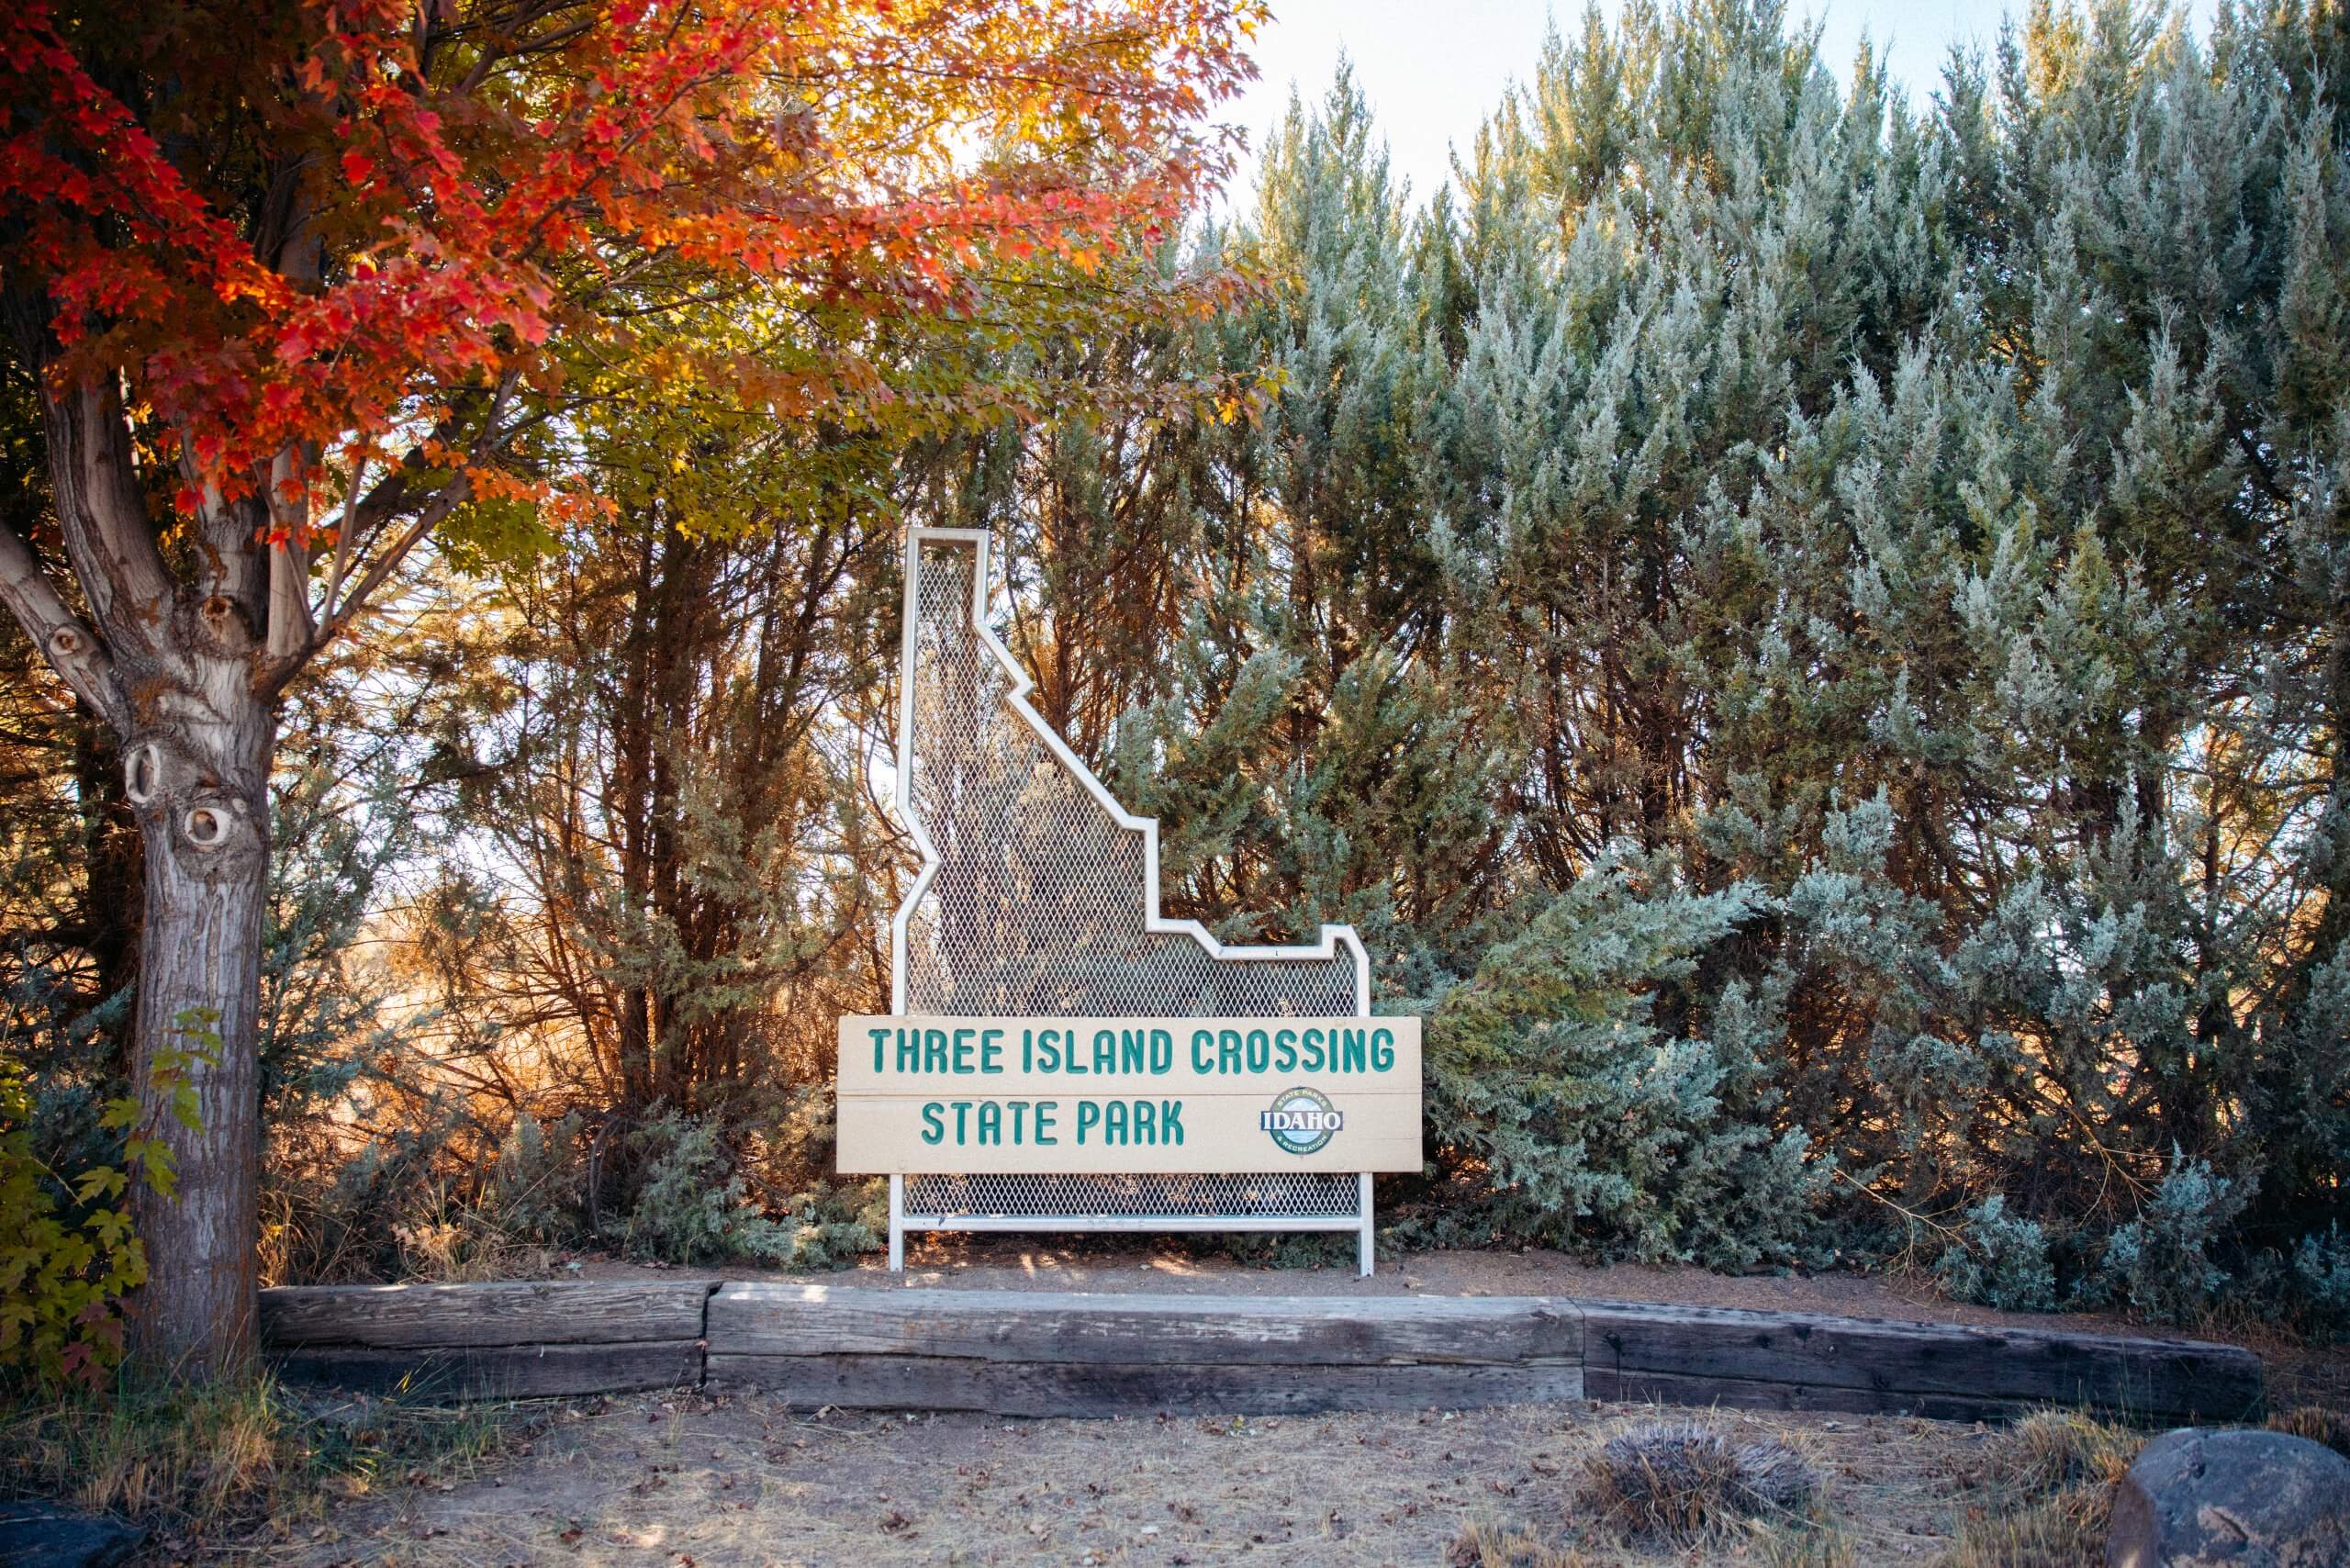 A sign shaped like the state of Idaho that reads "Three Island Crossing State Park".